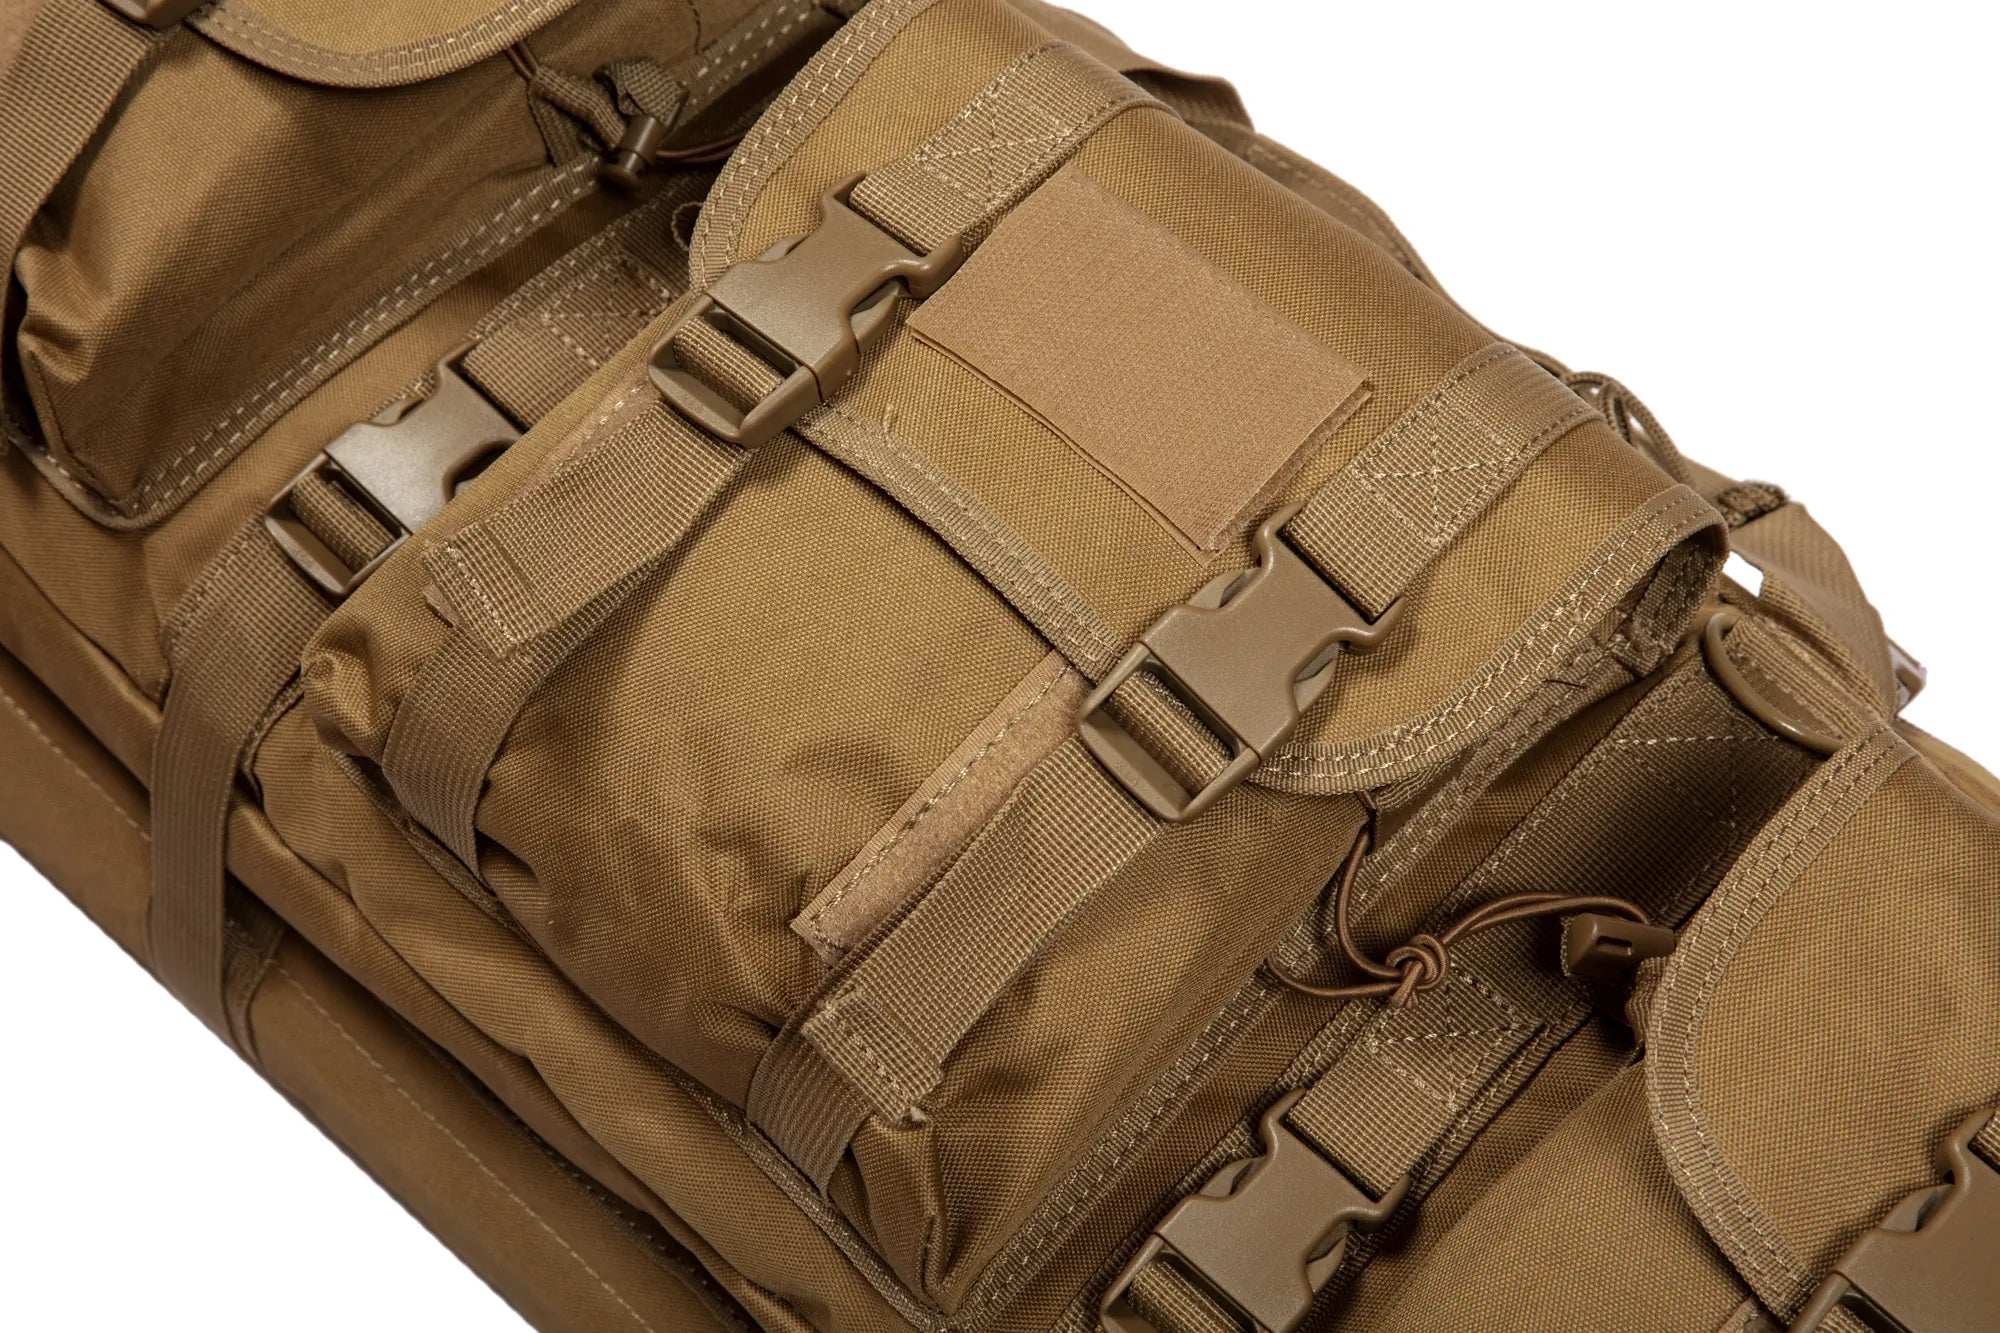 NP PMC Deluxe Soft Double Rifle Bag 42 - Tan"-4